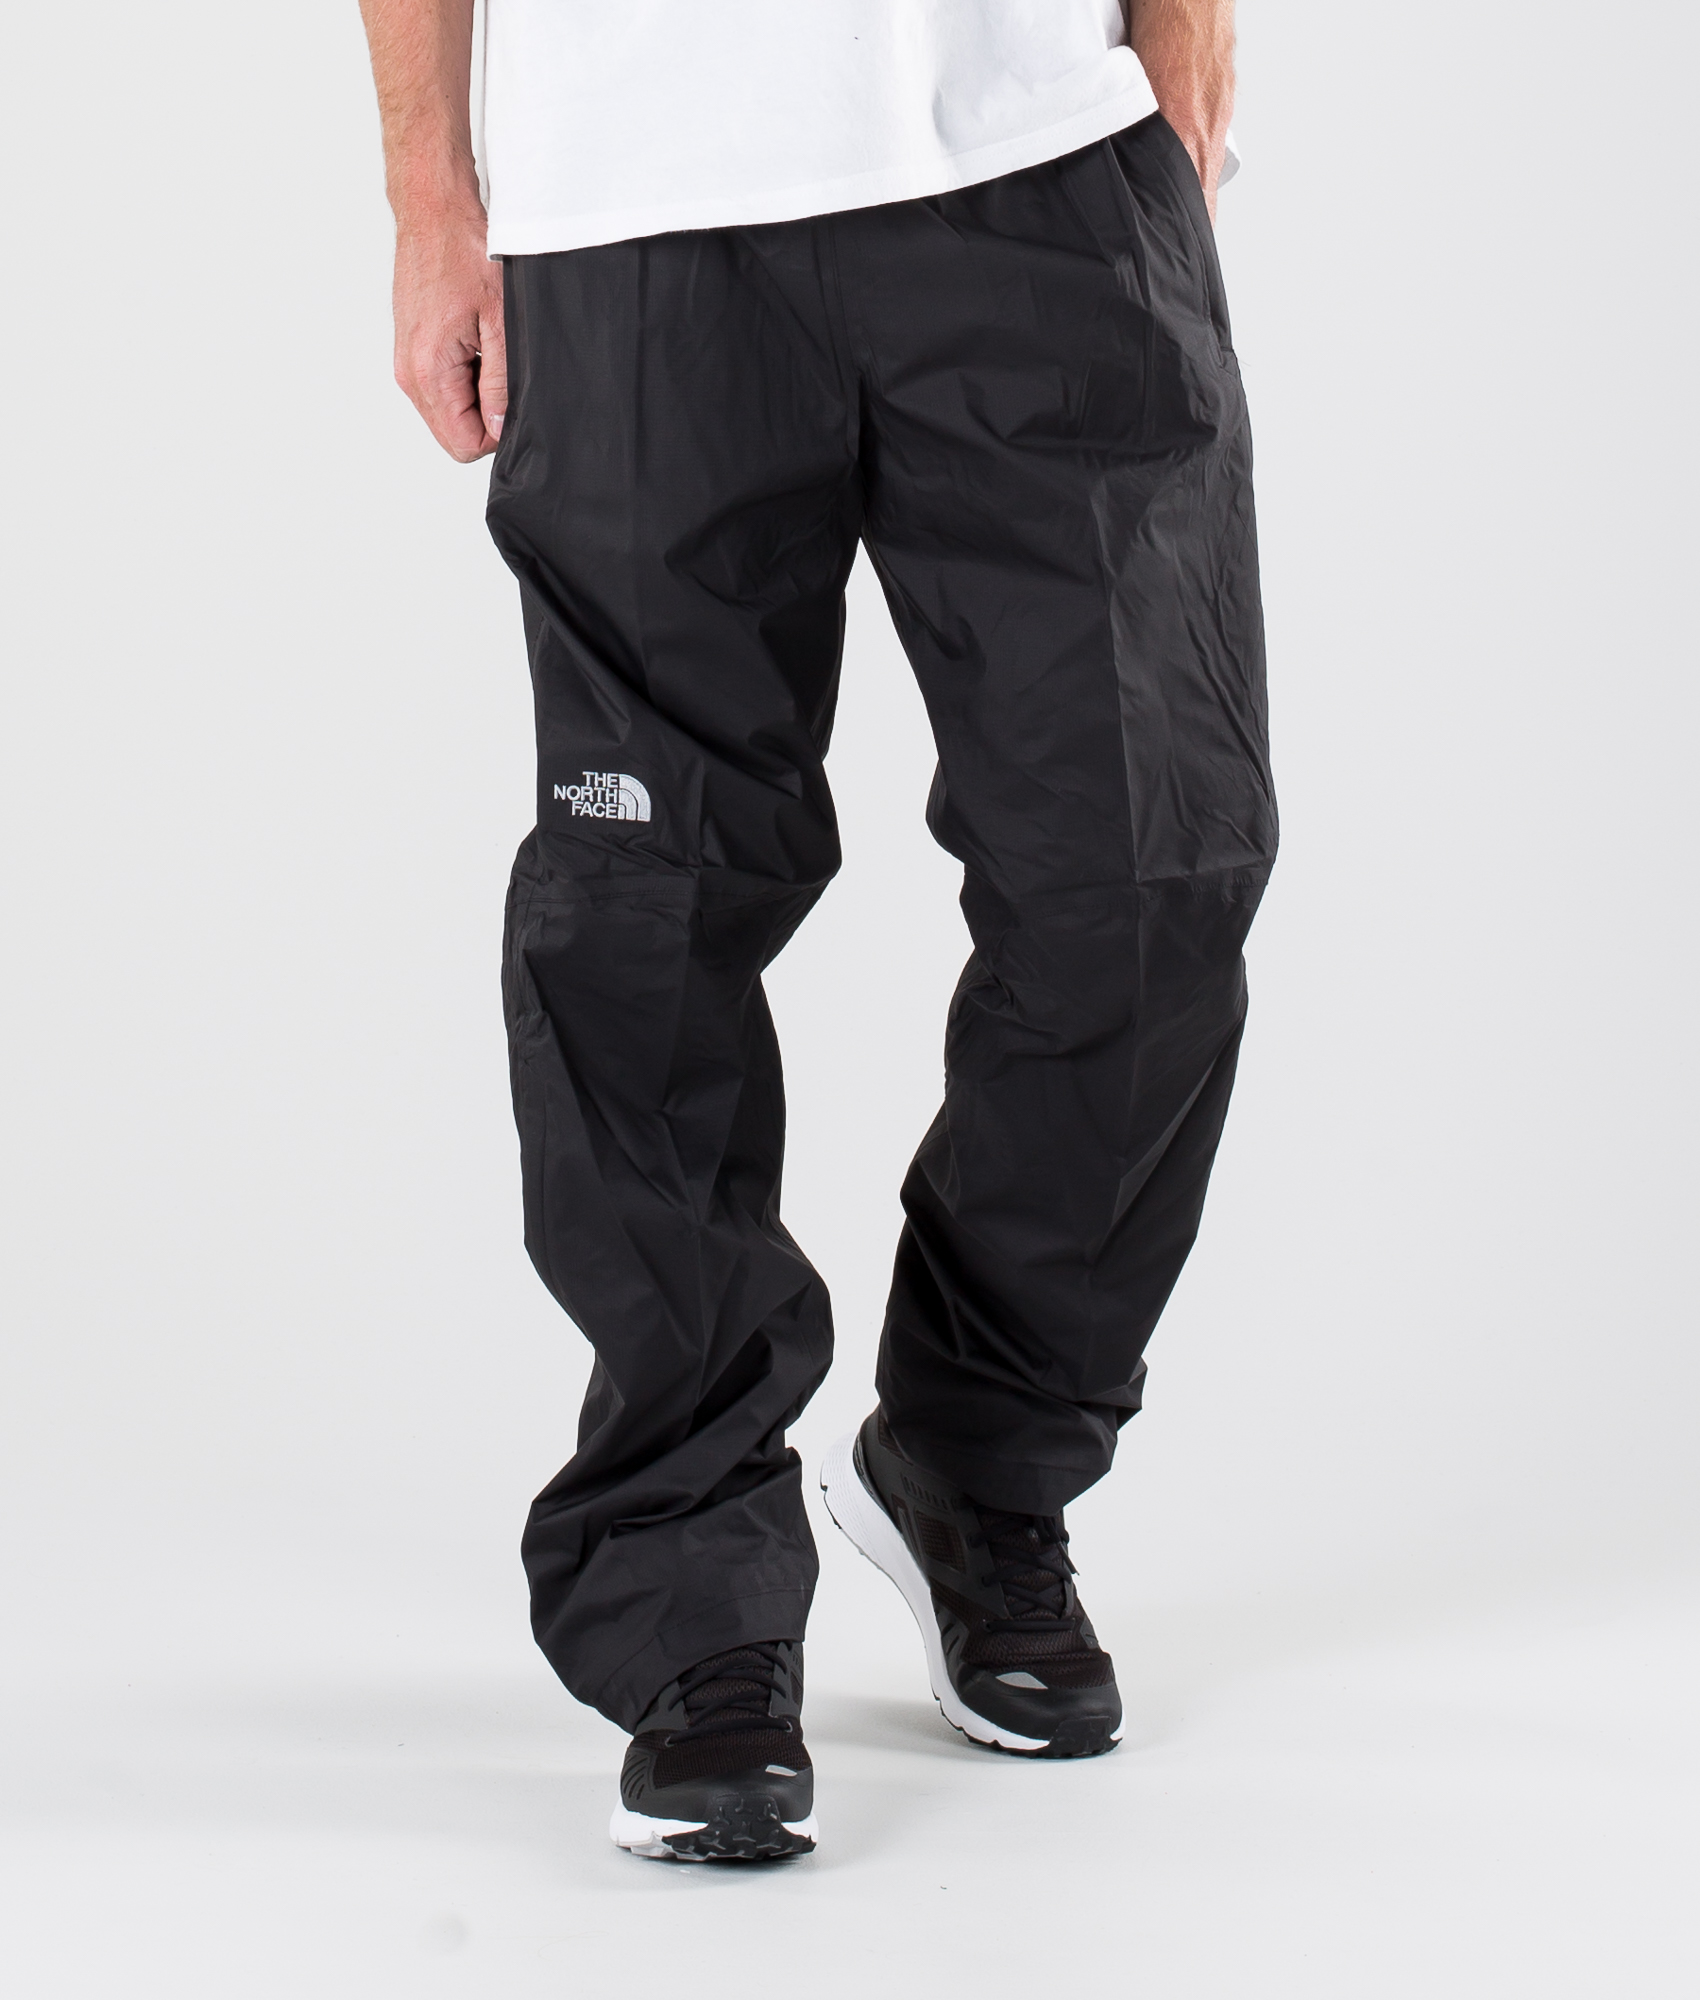 The North Face Venture Pants Flash Sales, 53% OFF | empow-her.com